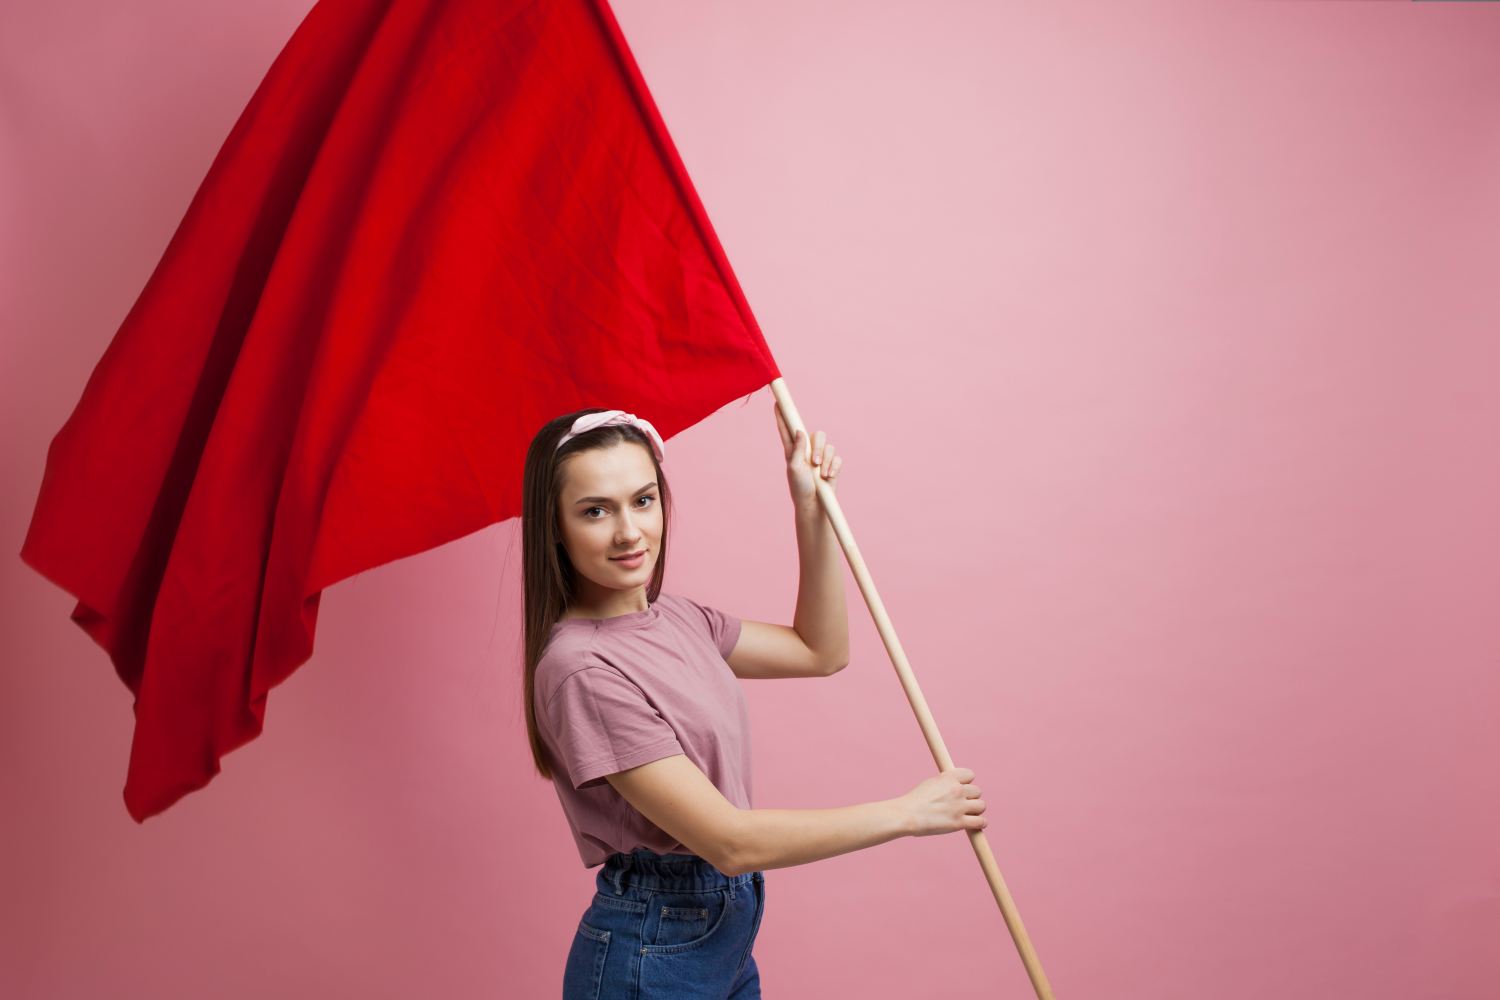 5 Common College Application Red Flags and How to Address Them